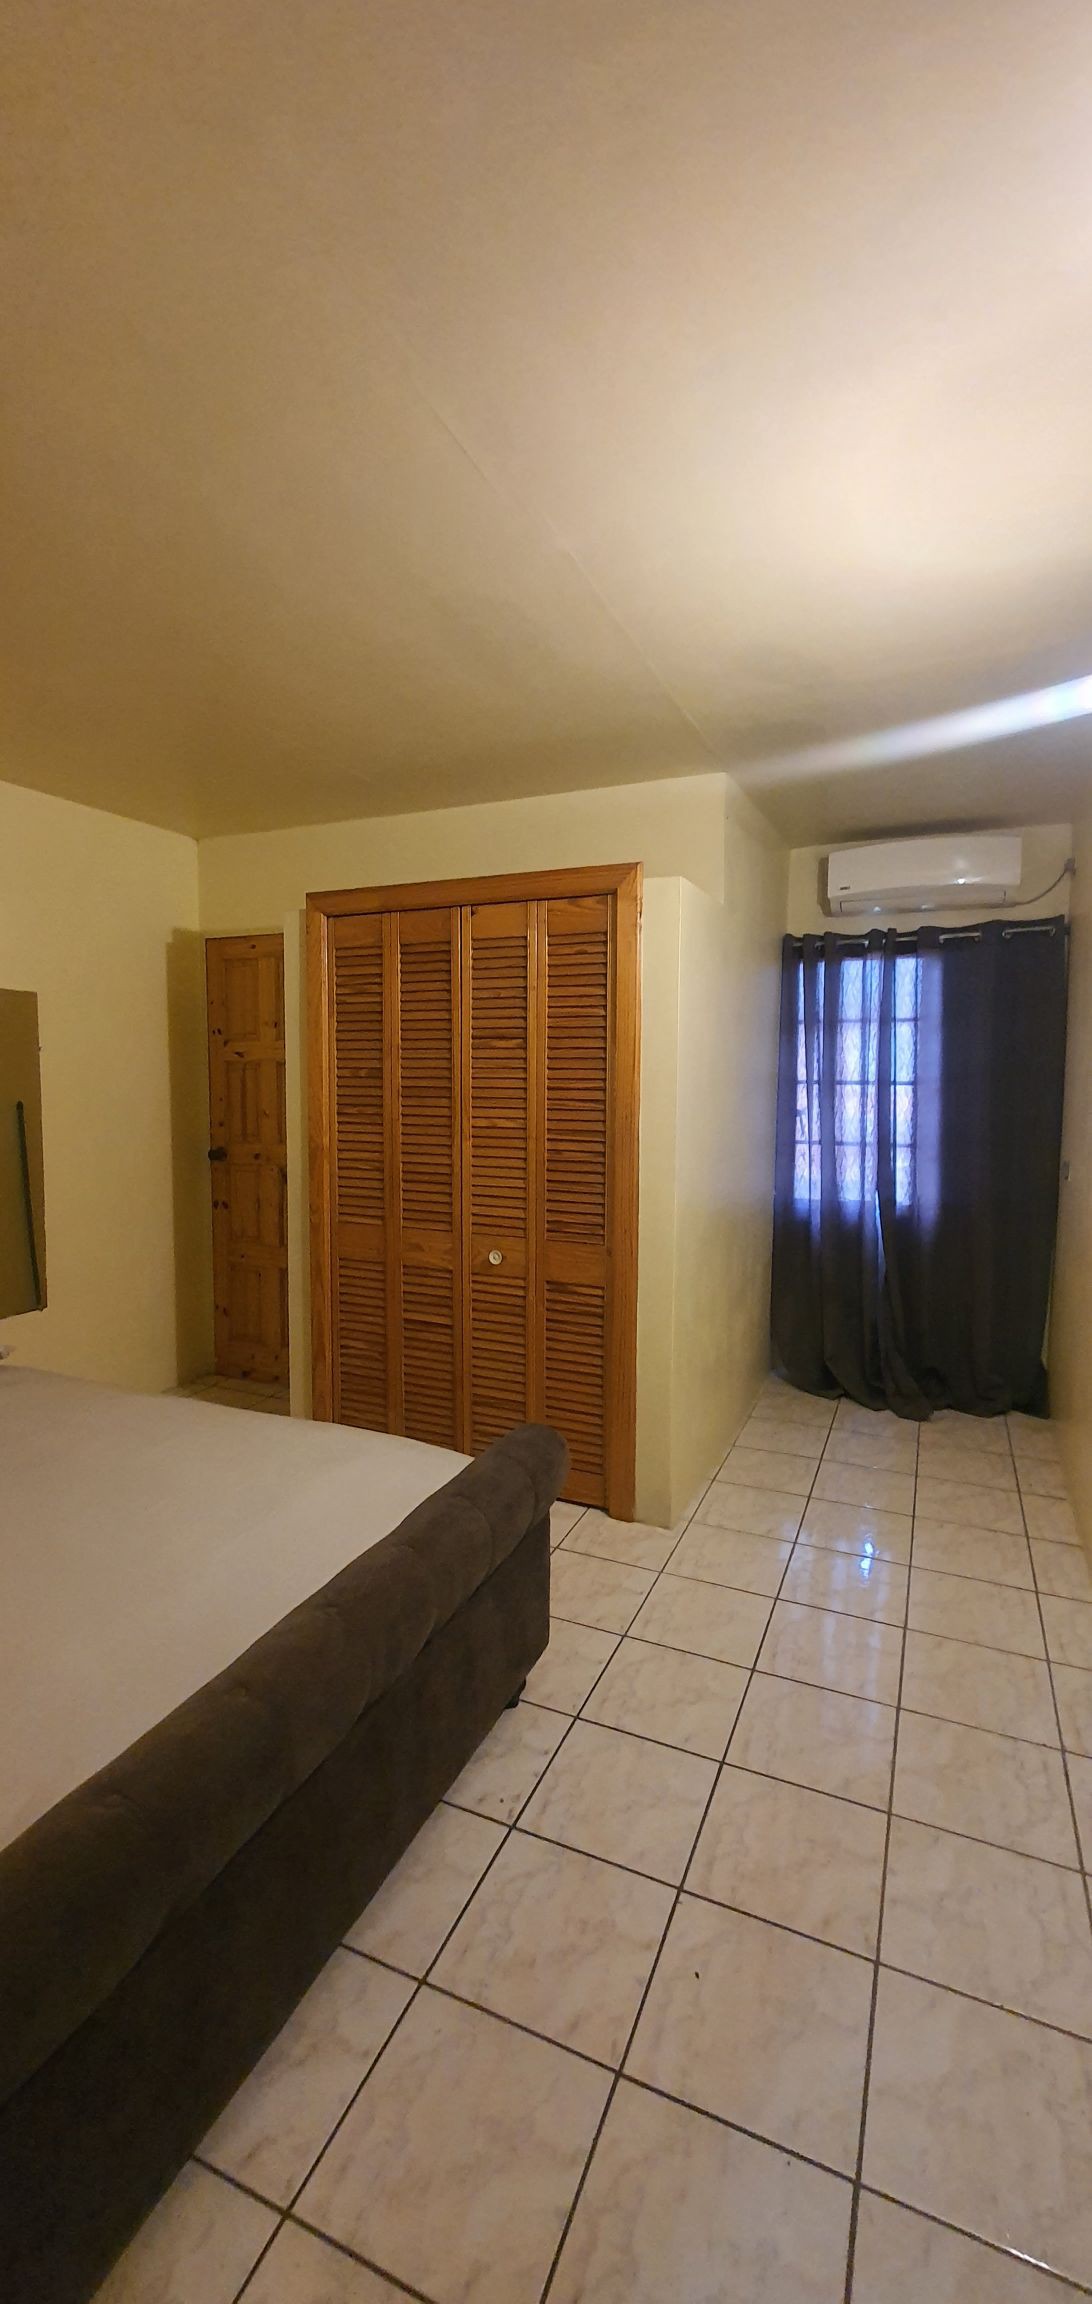 Curepe One Bedroom Apartment